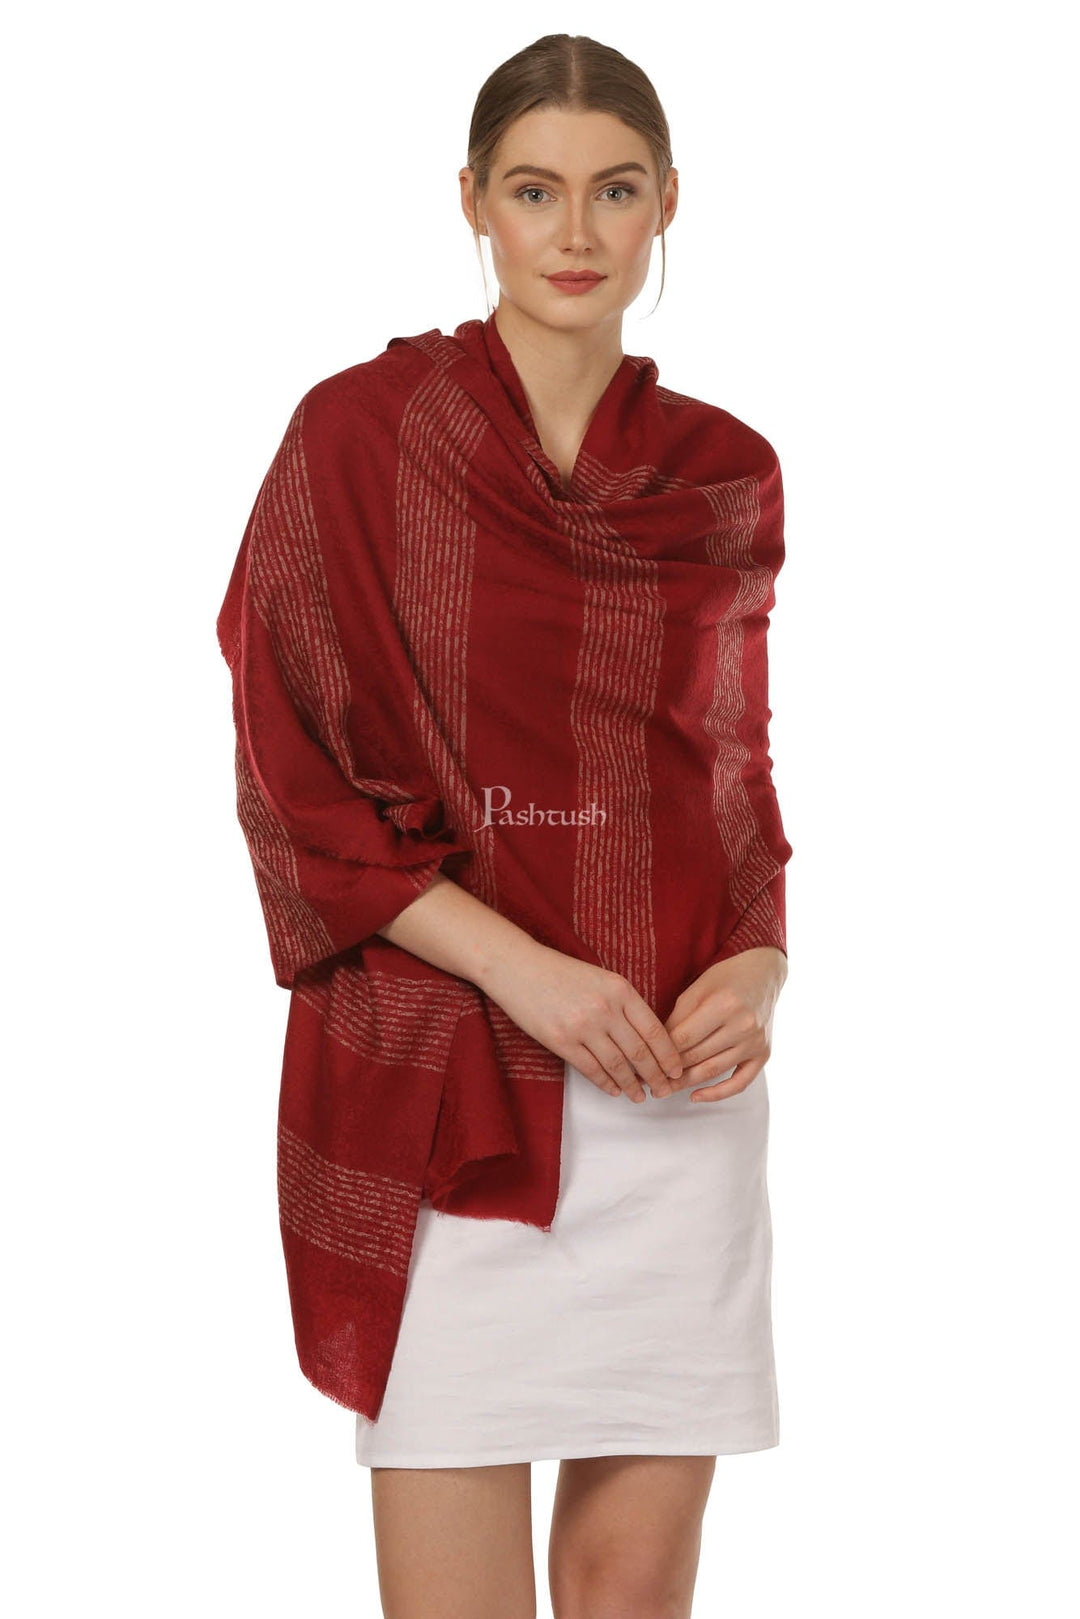 Pashtush India Womens Stoles and Scarves Scarf Pashtush Women'S Reversible Blended Fine Wool Stole - Scarlet Red